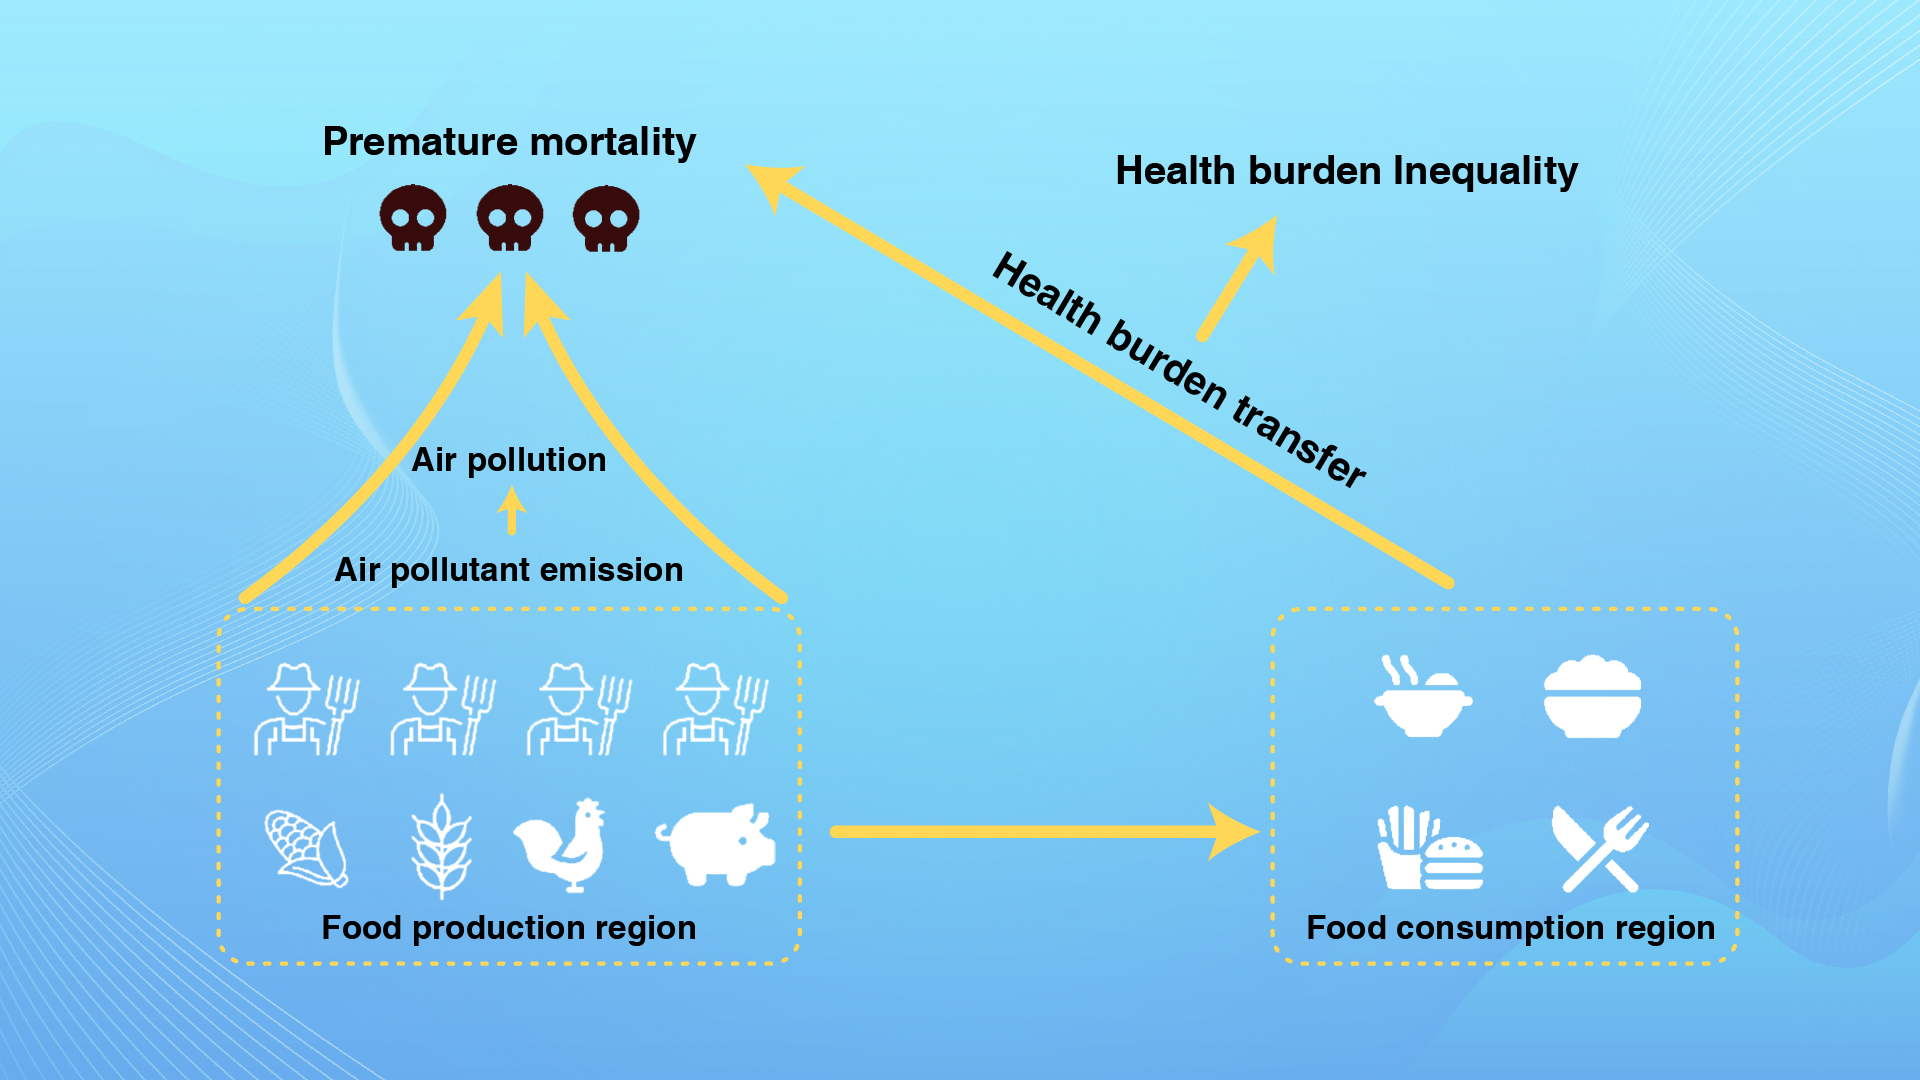 Researchers reveal air pollution-related health burden inequality in food system